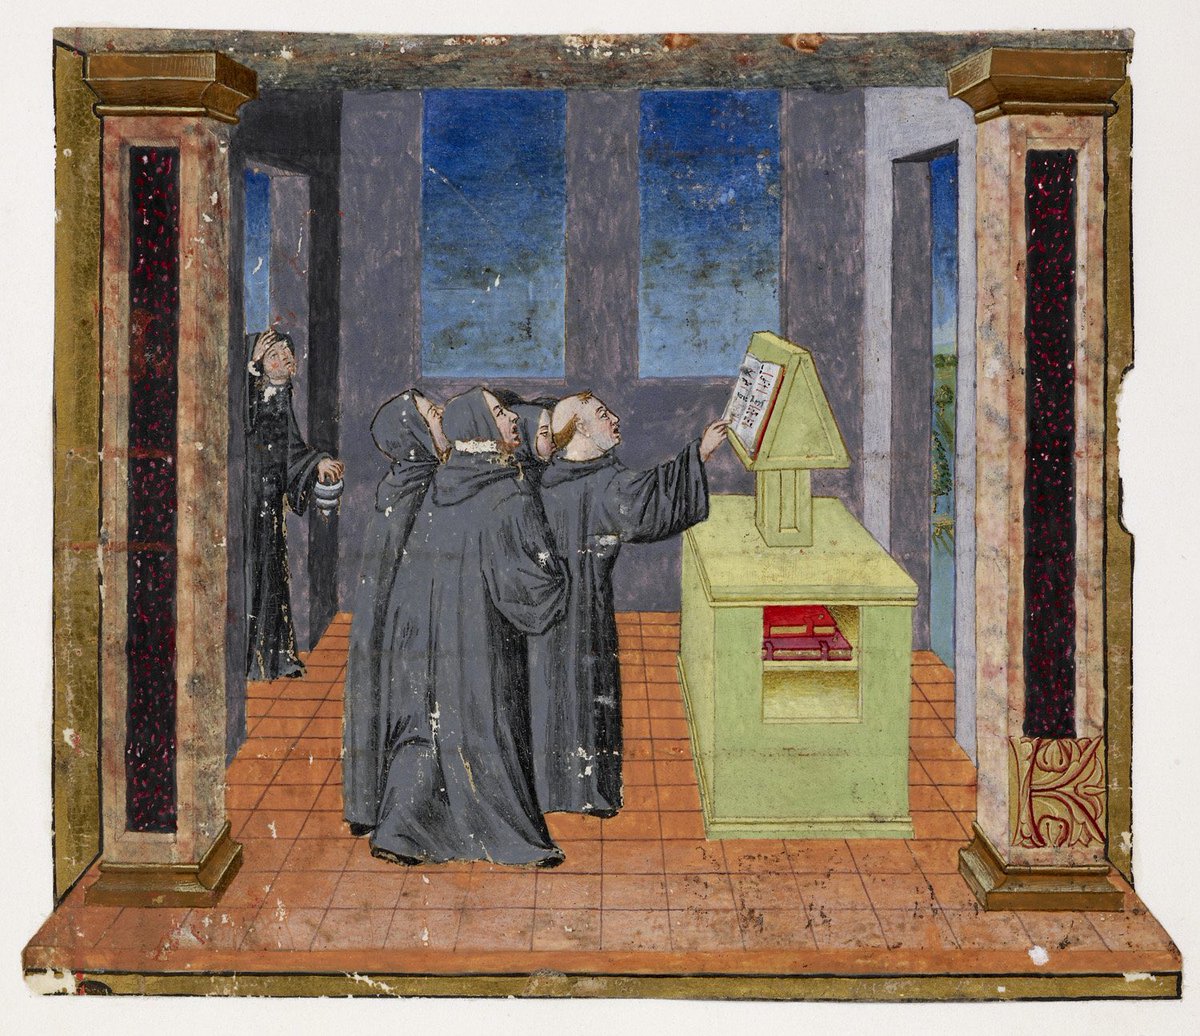 Benedictine monks chanting
#StBenedict
BL Add MS 39636; Cuttings from a Gradual; 3rd quarter of the 15th century; Italy (Lombardy); f.10r @BLMedieval